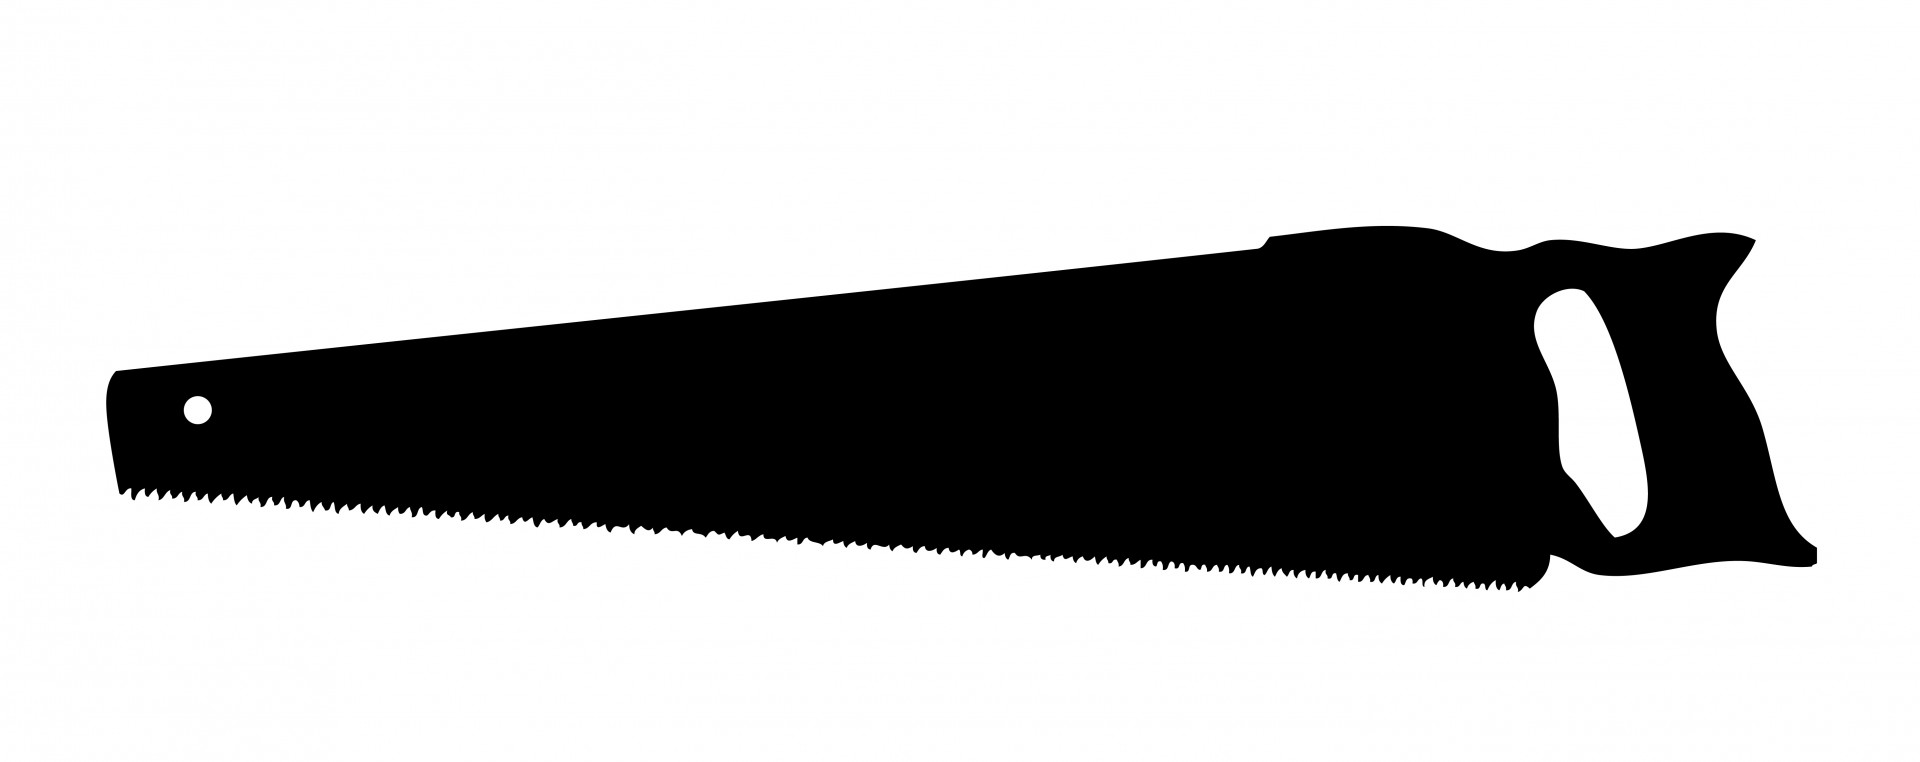 Hand Saw Clipart - Hand Saw Clipart